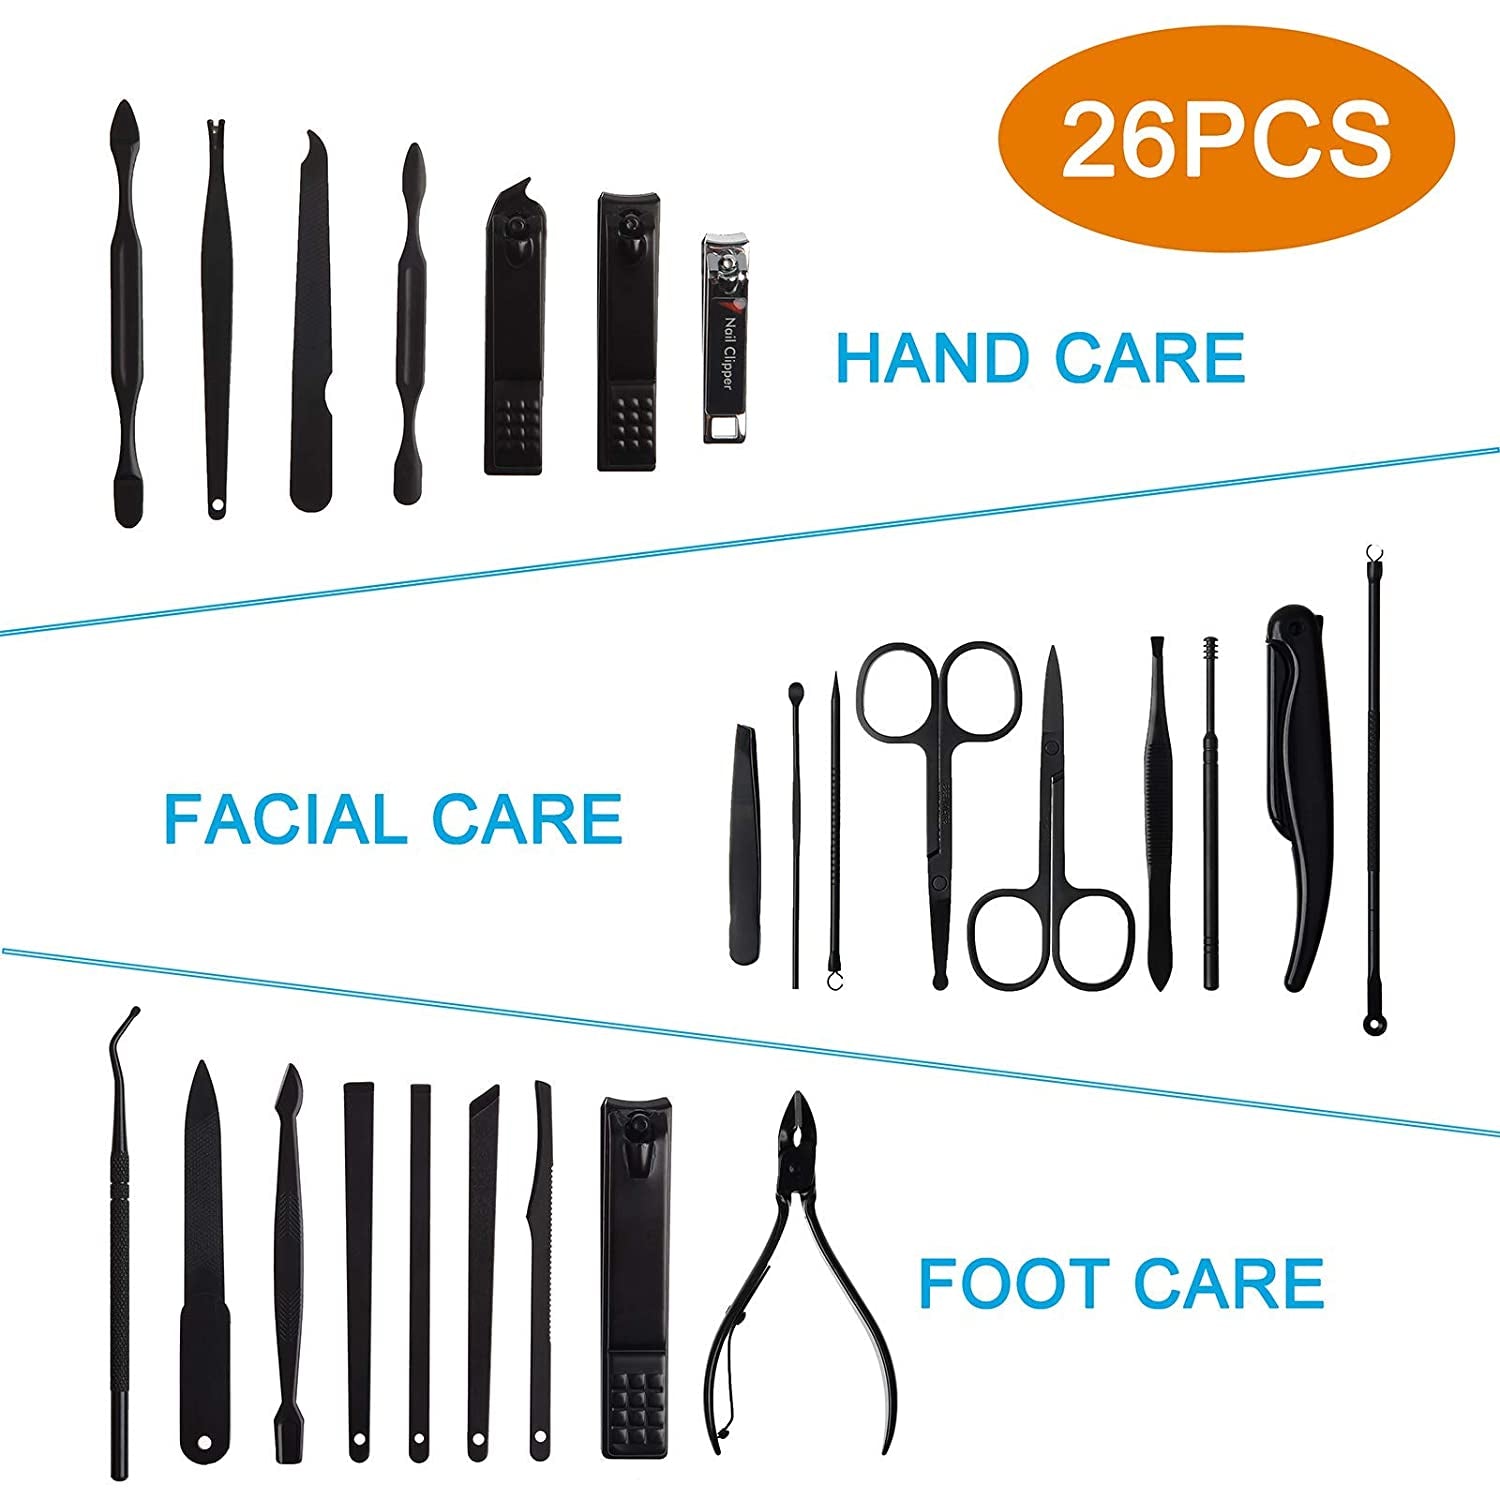 26 PCS Premium Manicure Set,  Nail Clippers, Professional Grooming Gift Kit, Pedicure Kit, Stainless Steel Facial, Cuticle, Nail Care Tools with Luxurious Portable Travel Case, for Women & Men